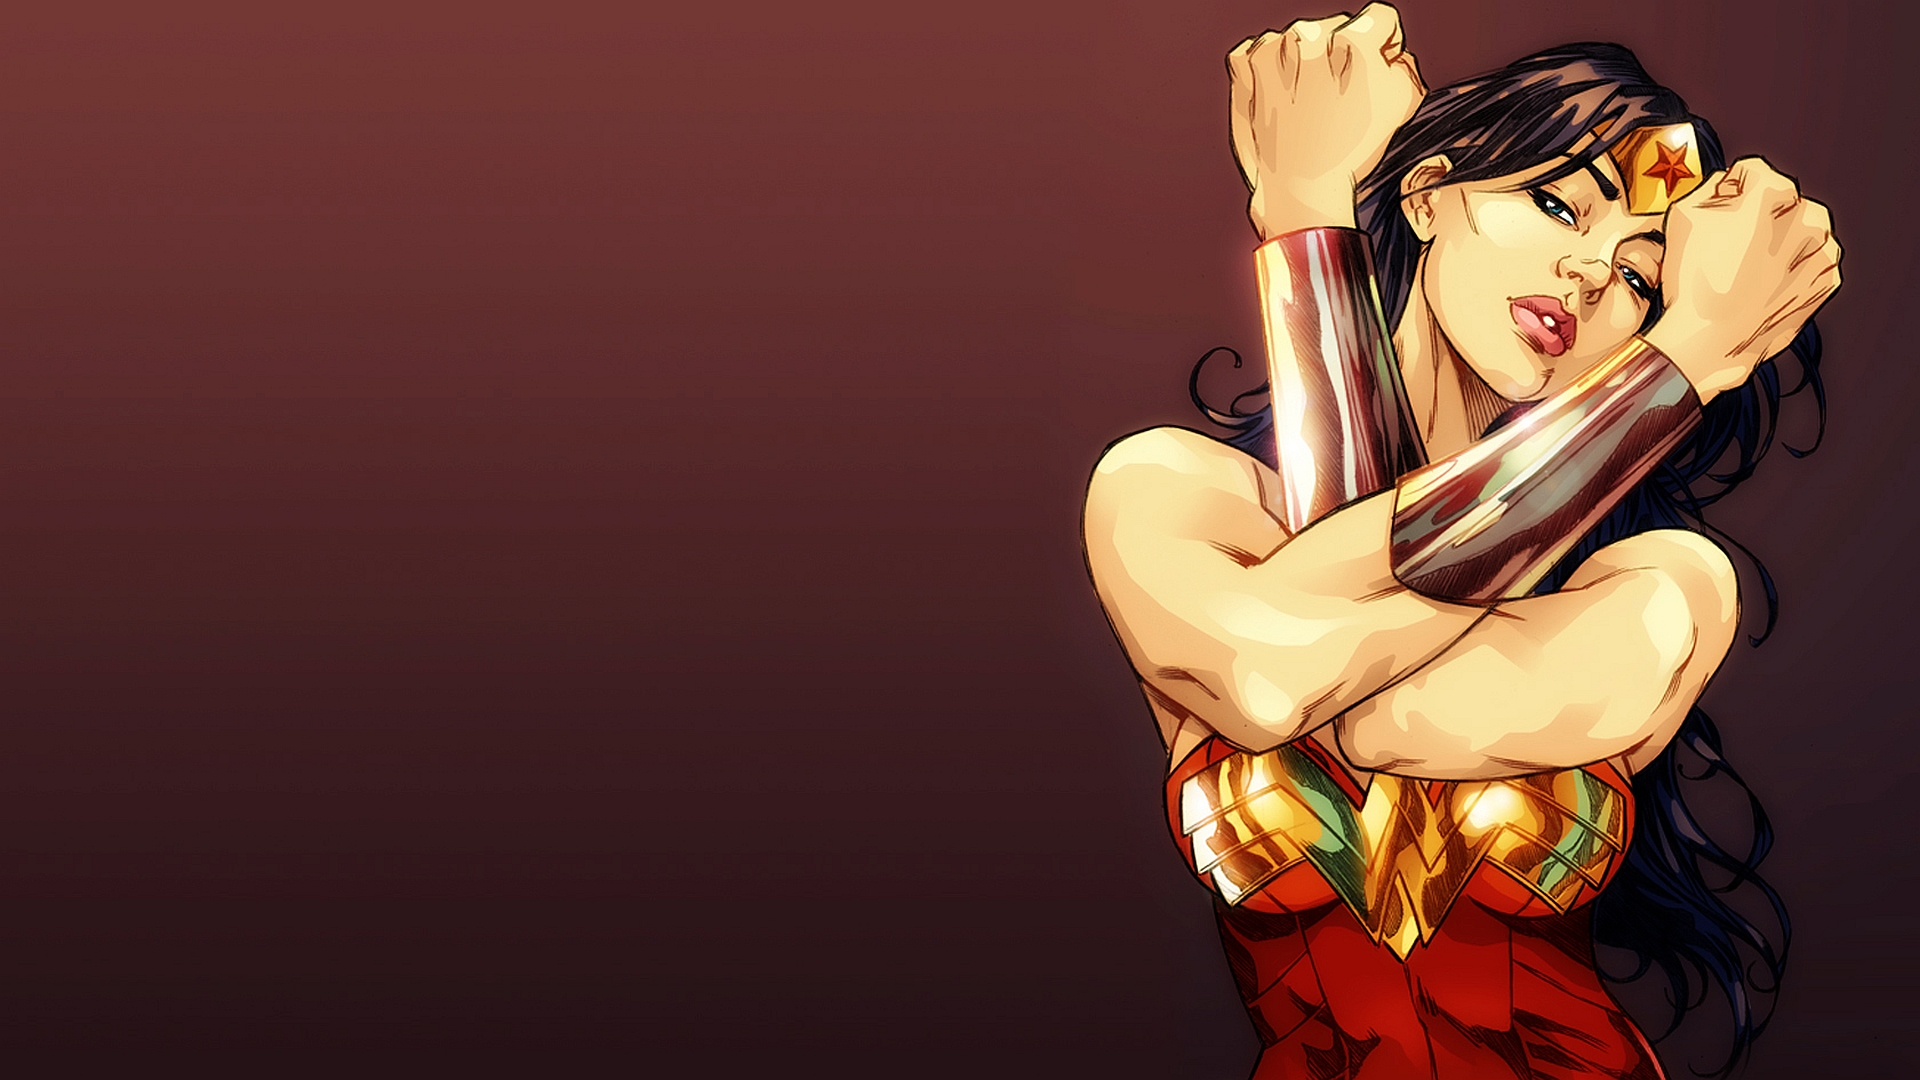 460+ Wonder Woman HD Wallpapers and Backgrounds